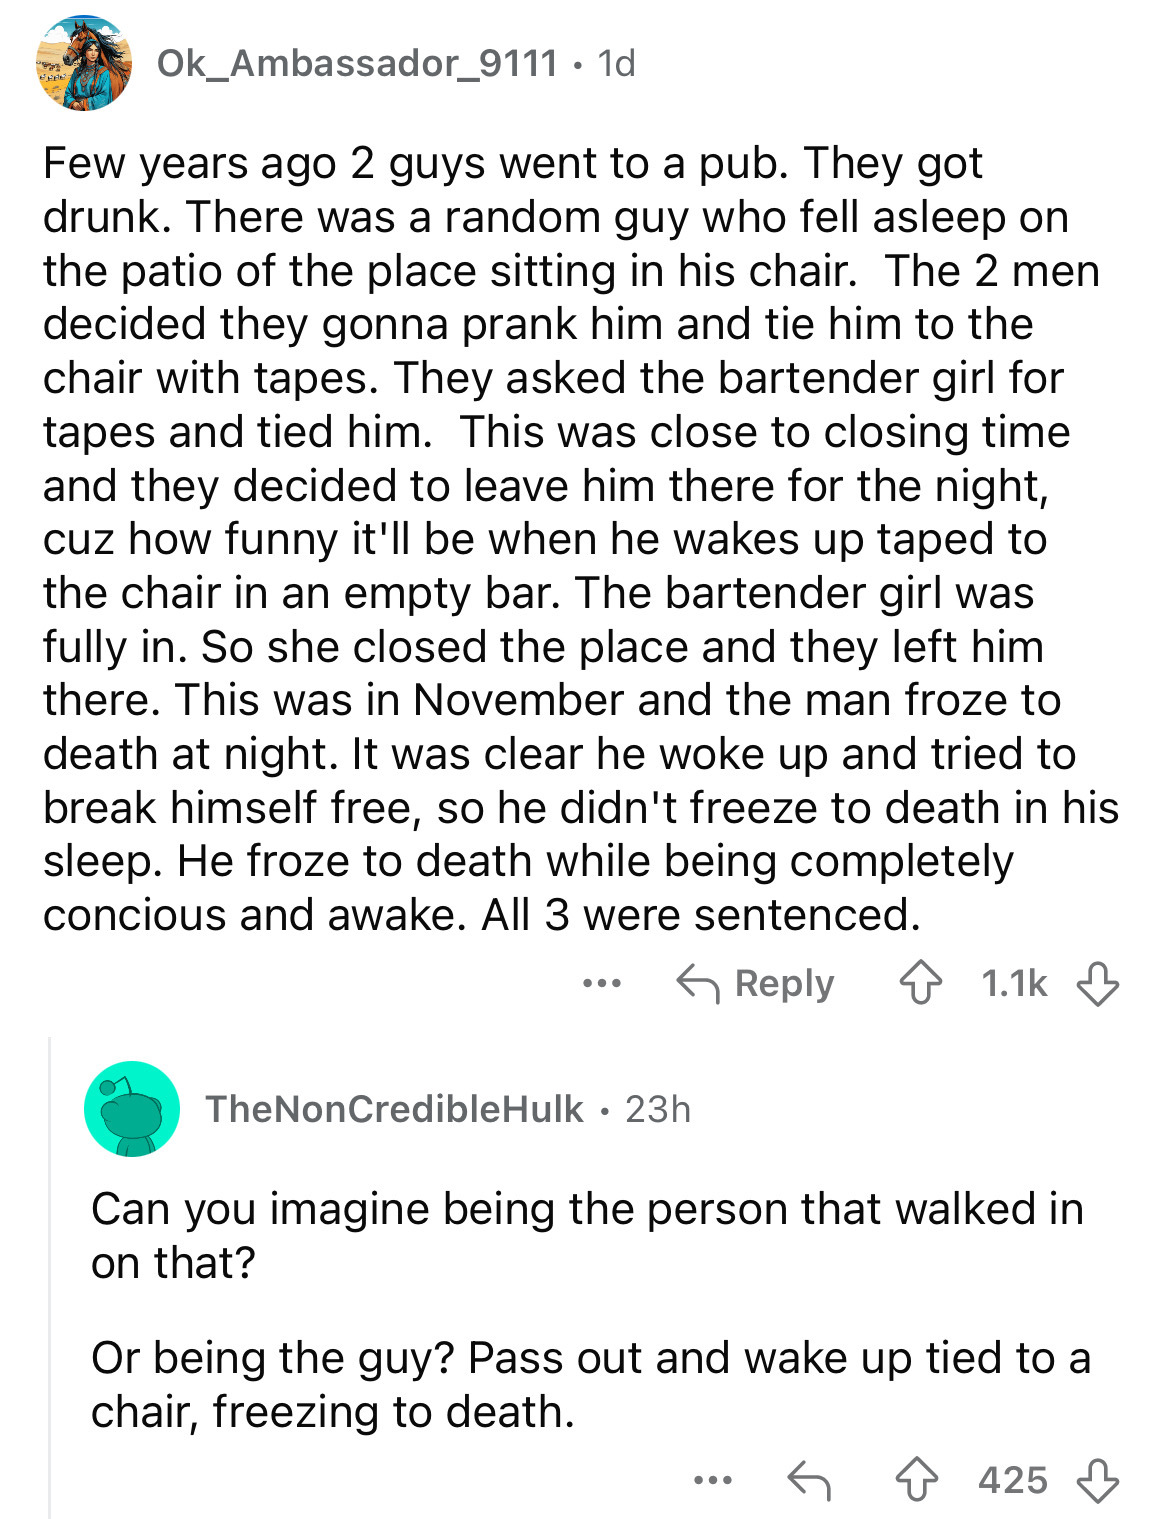 document - Ok_Ambassador_9111. 1d Few years ago 2 guys went to a pub. They got drunk. There was a random guy who fell asleep on the patio of the place sitting in his chair. The 2 men decided they gonna prank him and tie him to the chair with tapes. They a